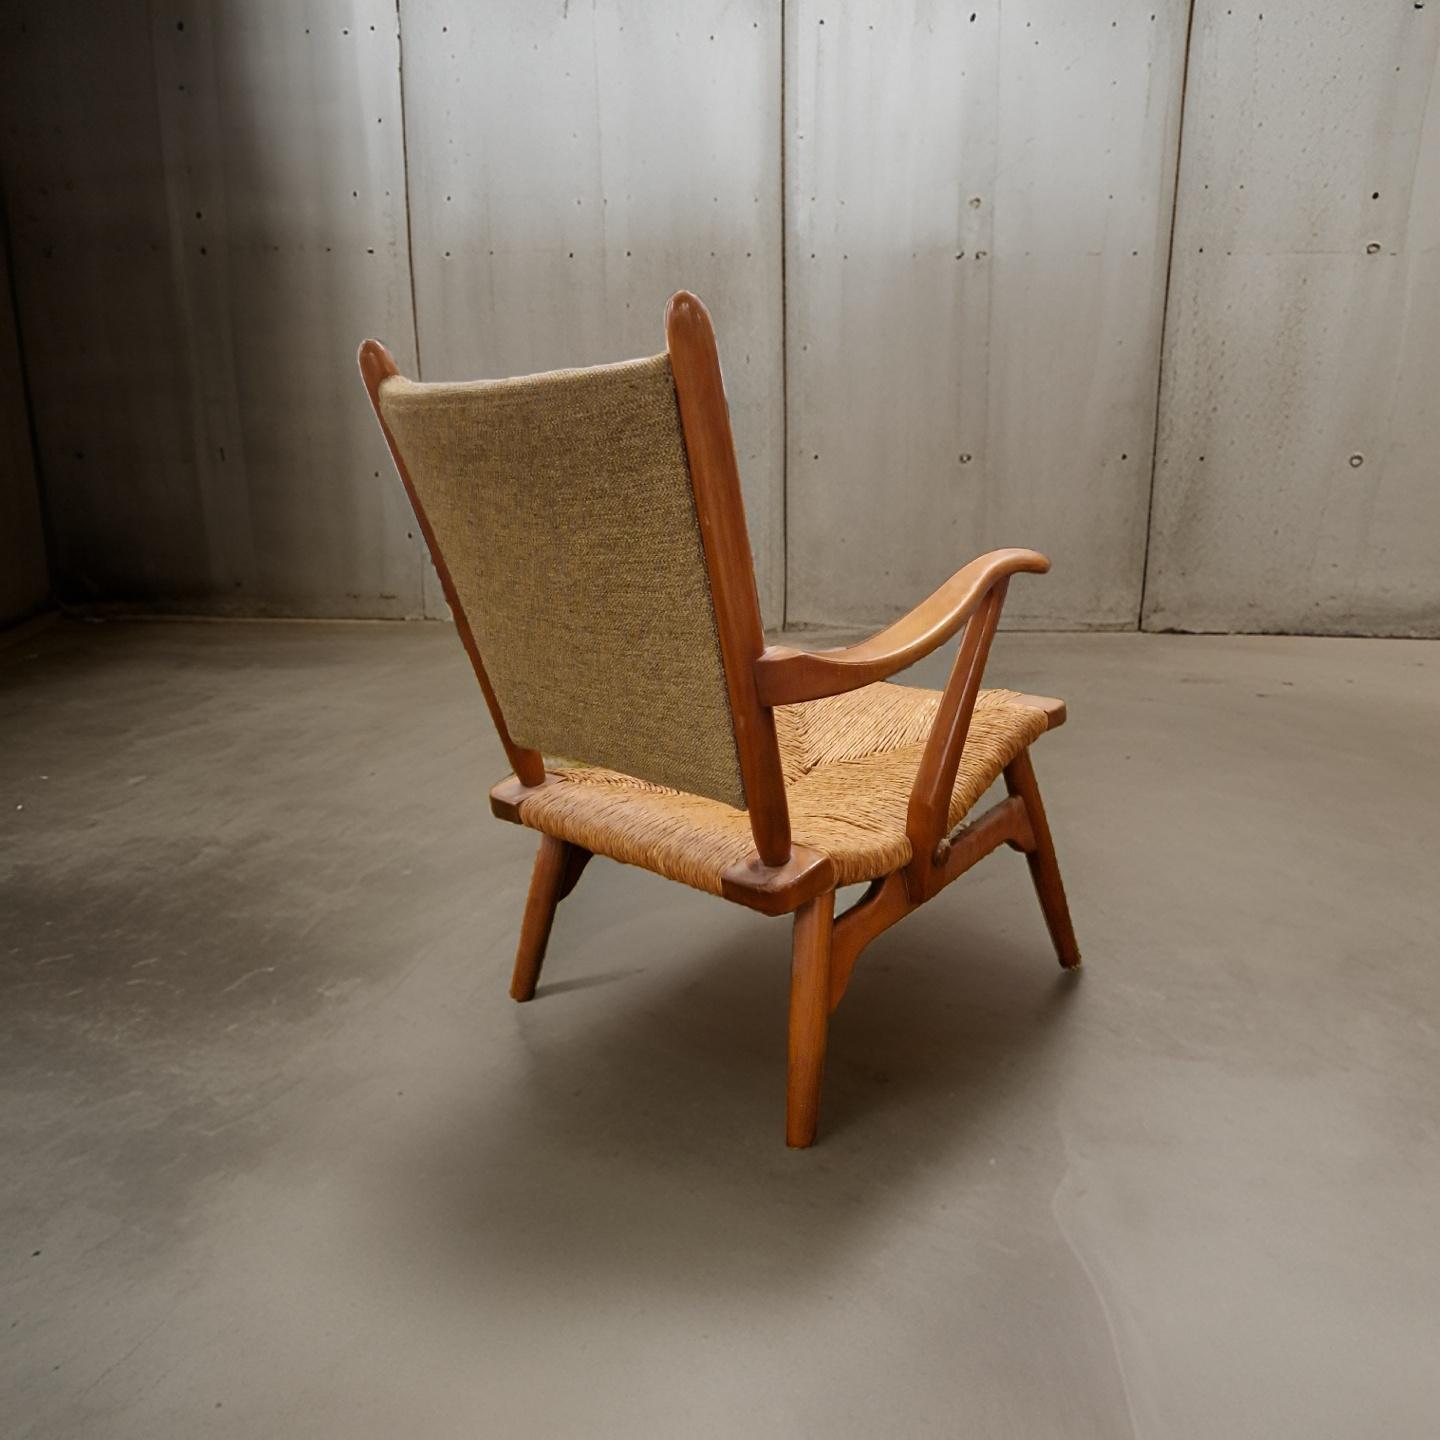 20th Century Mid century wood and rush lounge chair by de Ster Gelderland, Netherlands 1950s